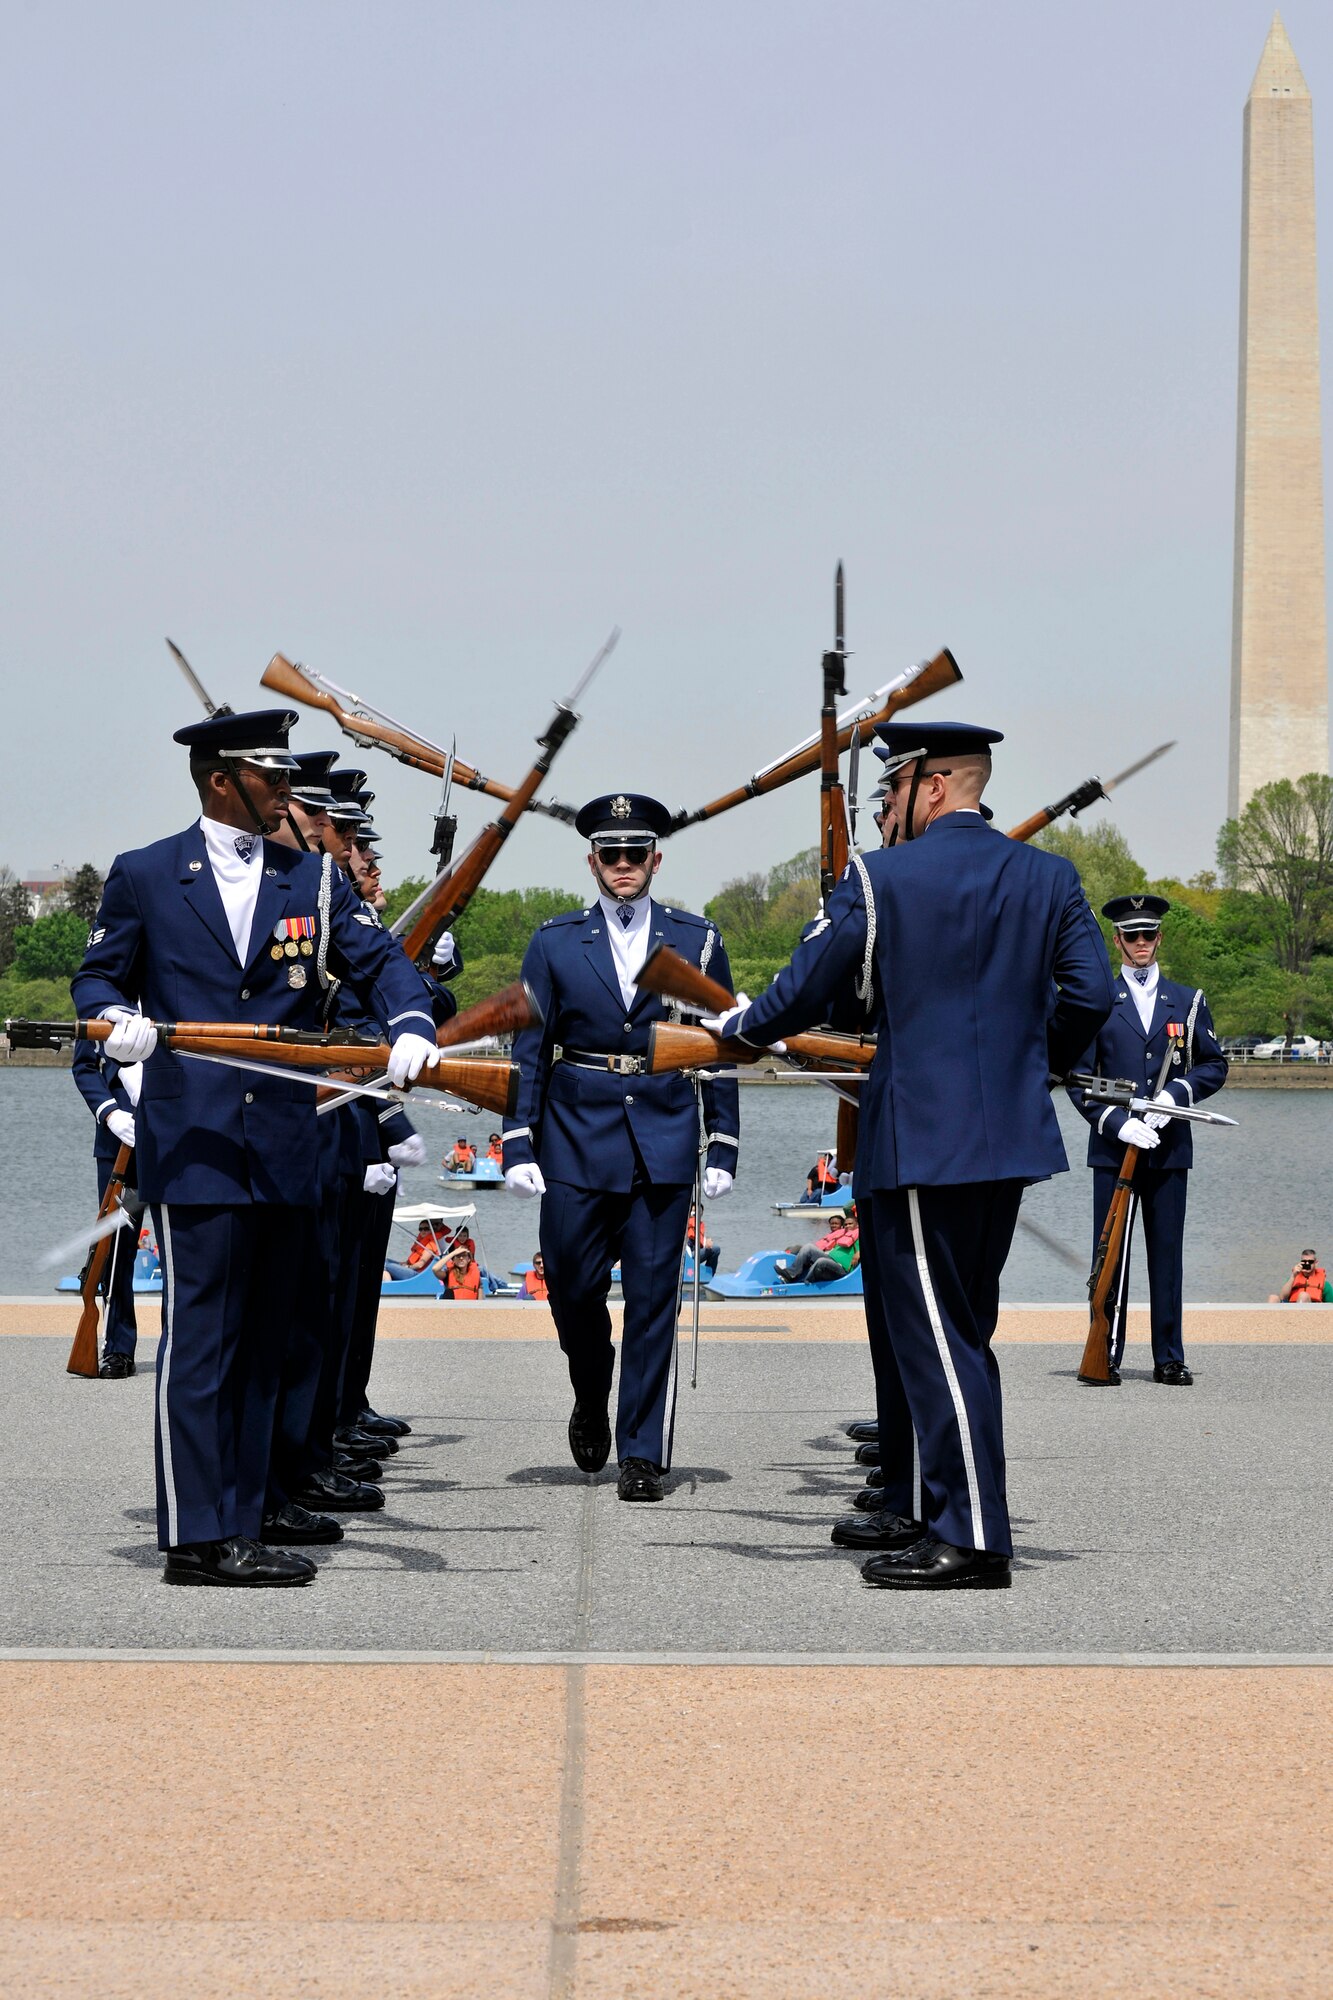 The United States Air Force Honor Guard Drill Team competes during the Joint Service Drill Exhibition on April 14 at the Jefferson Memorial in Washington, D.C. Drill teams from all four branches of the American armed services competed at the event.  (U.S. Air Force Photo/Senior Airman Perry Aston)